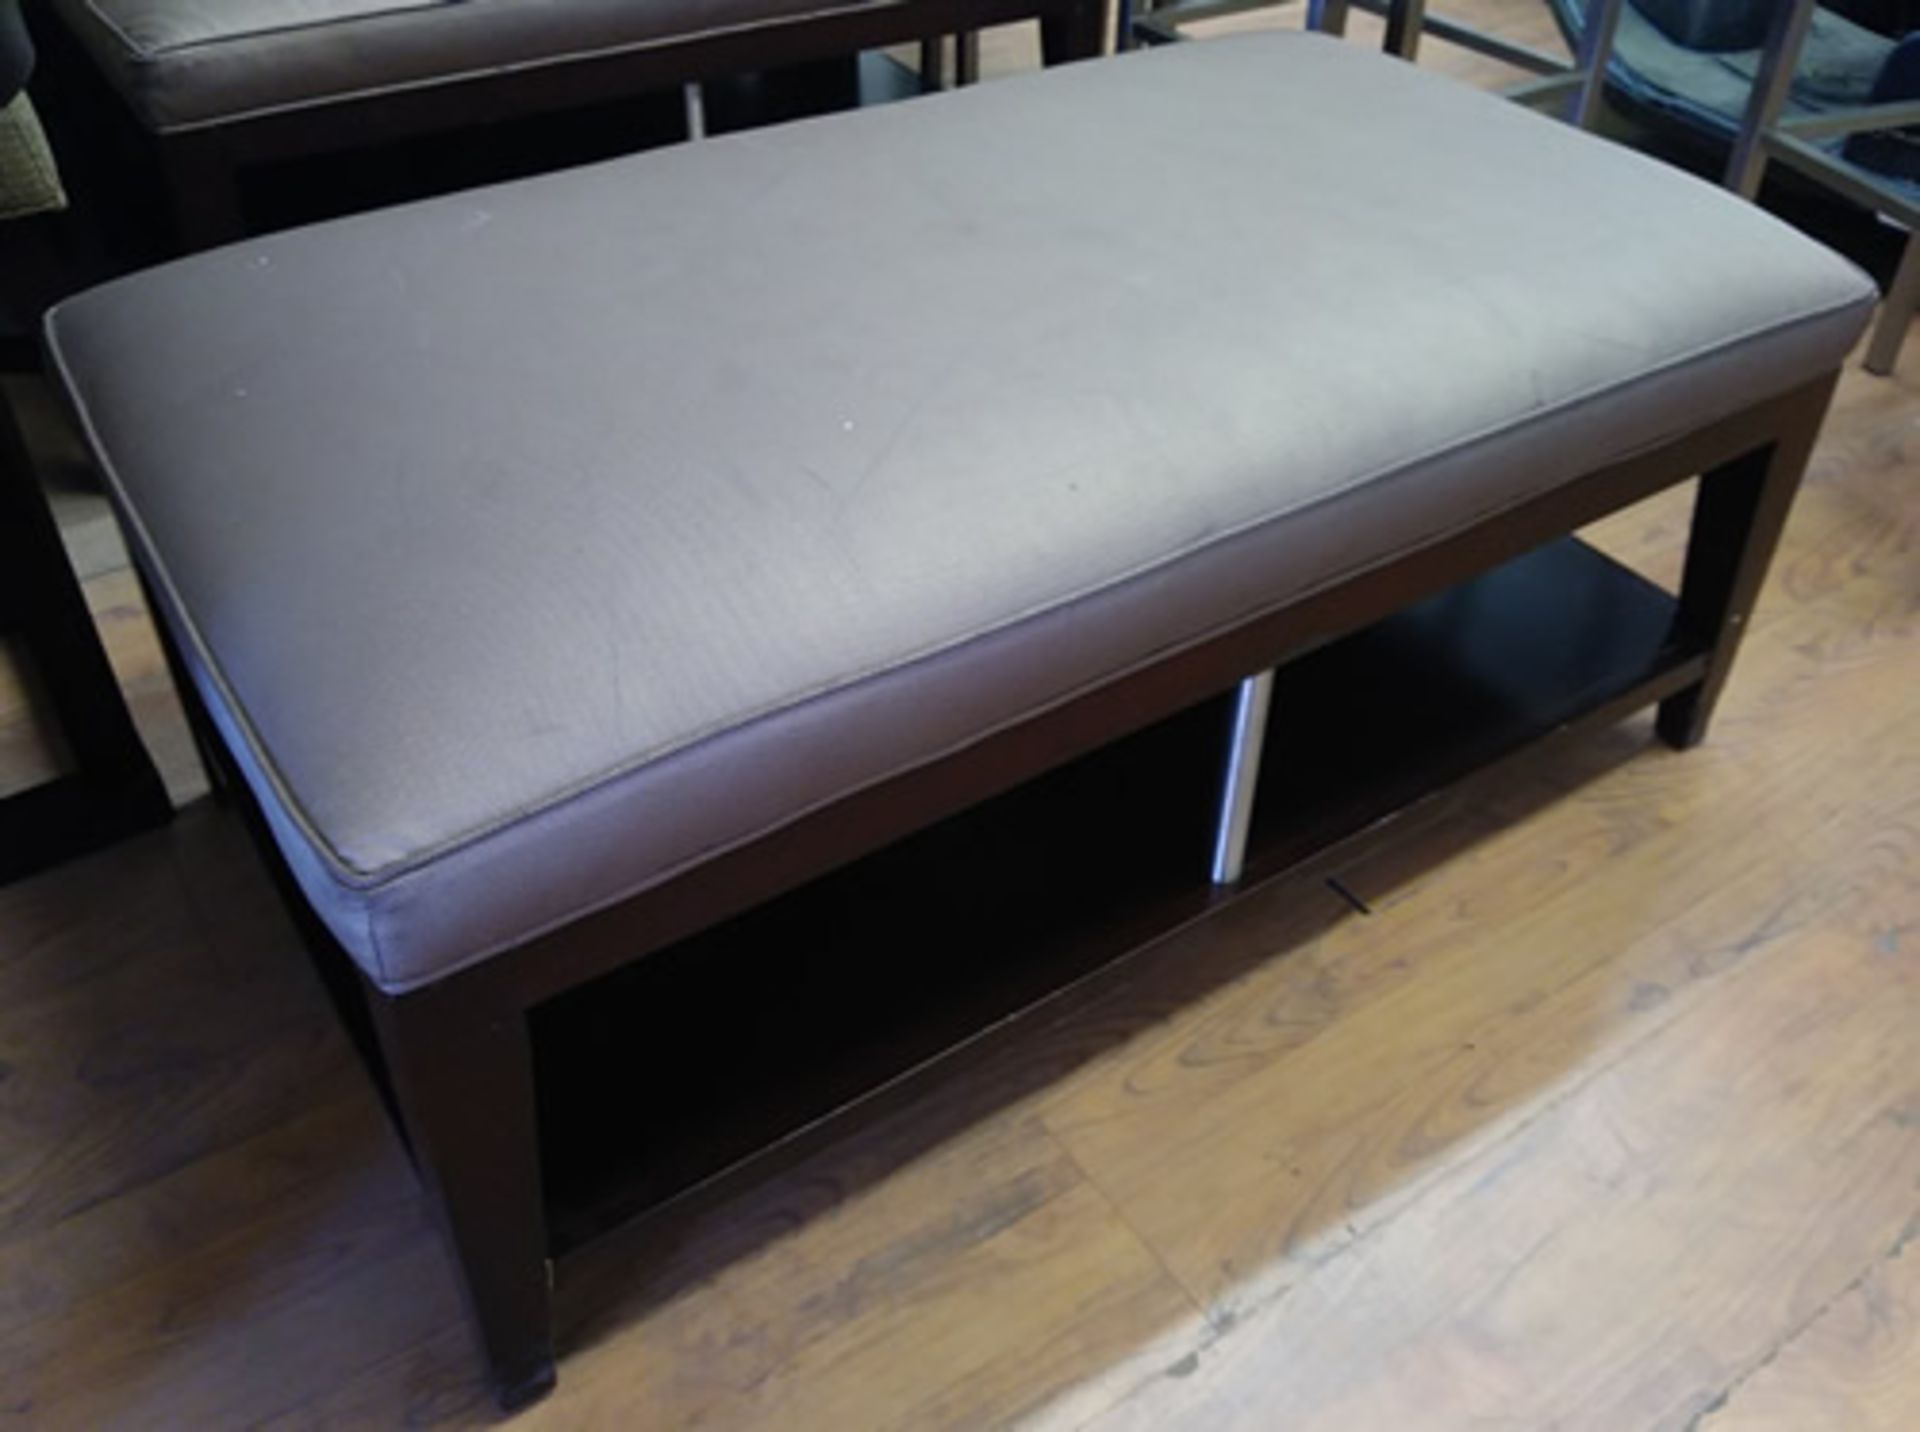 FOOTREST OTTOMAN WITH SHELF UNDERNEATH - Image 4 of 4